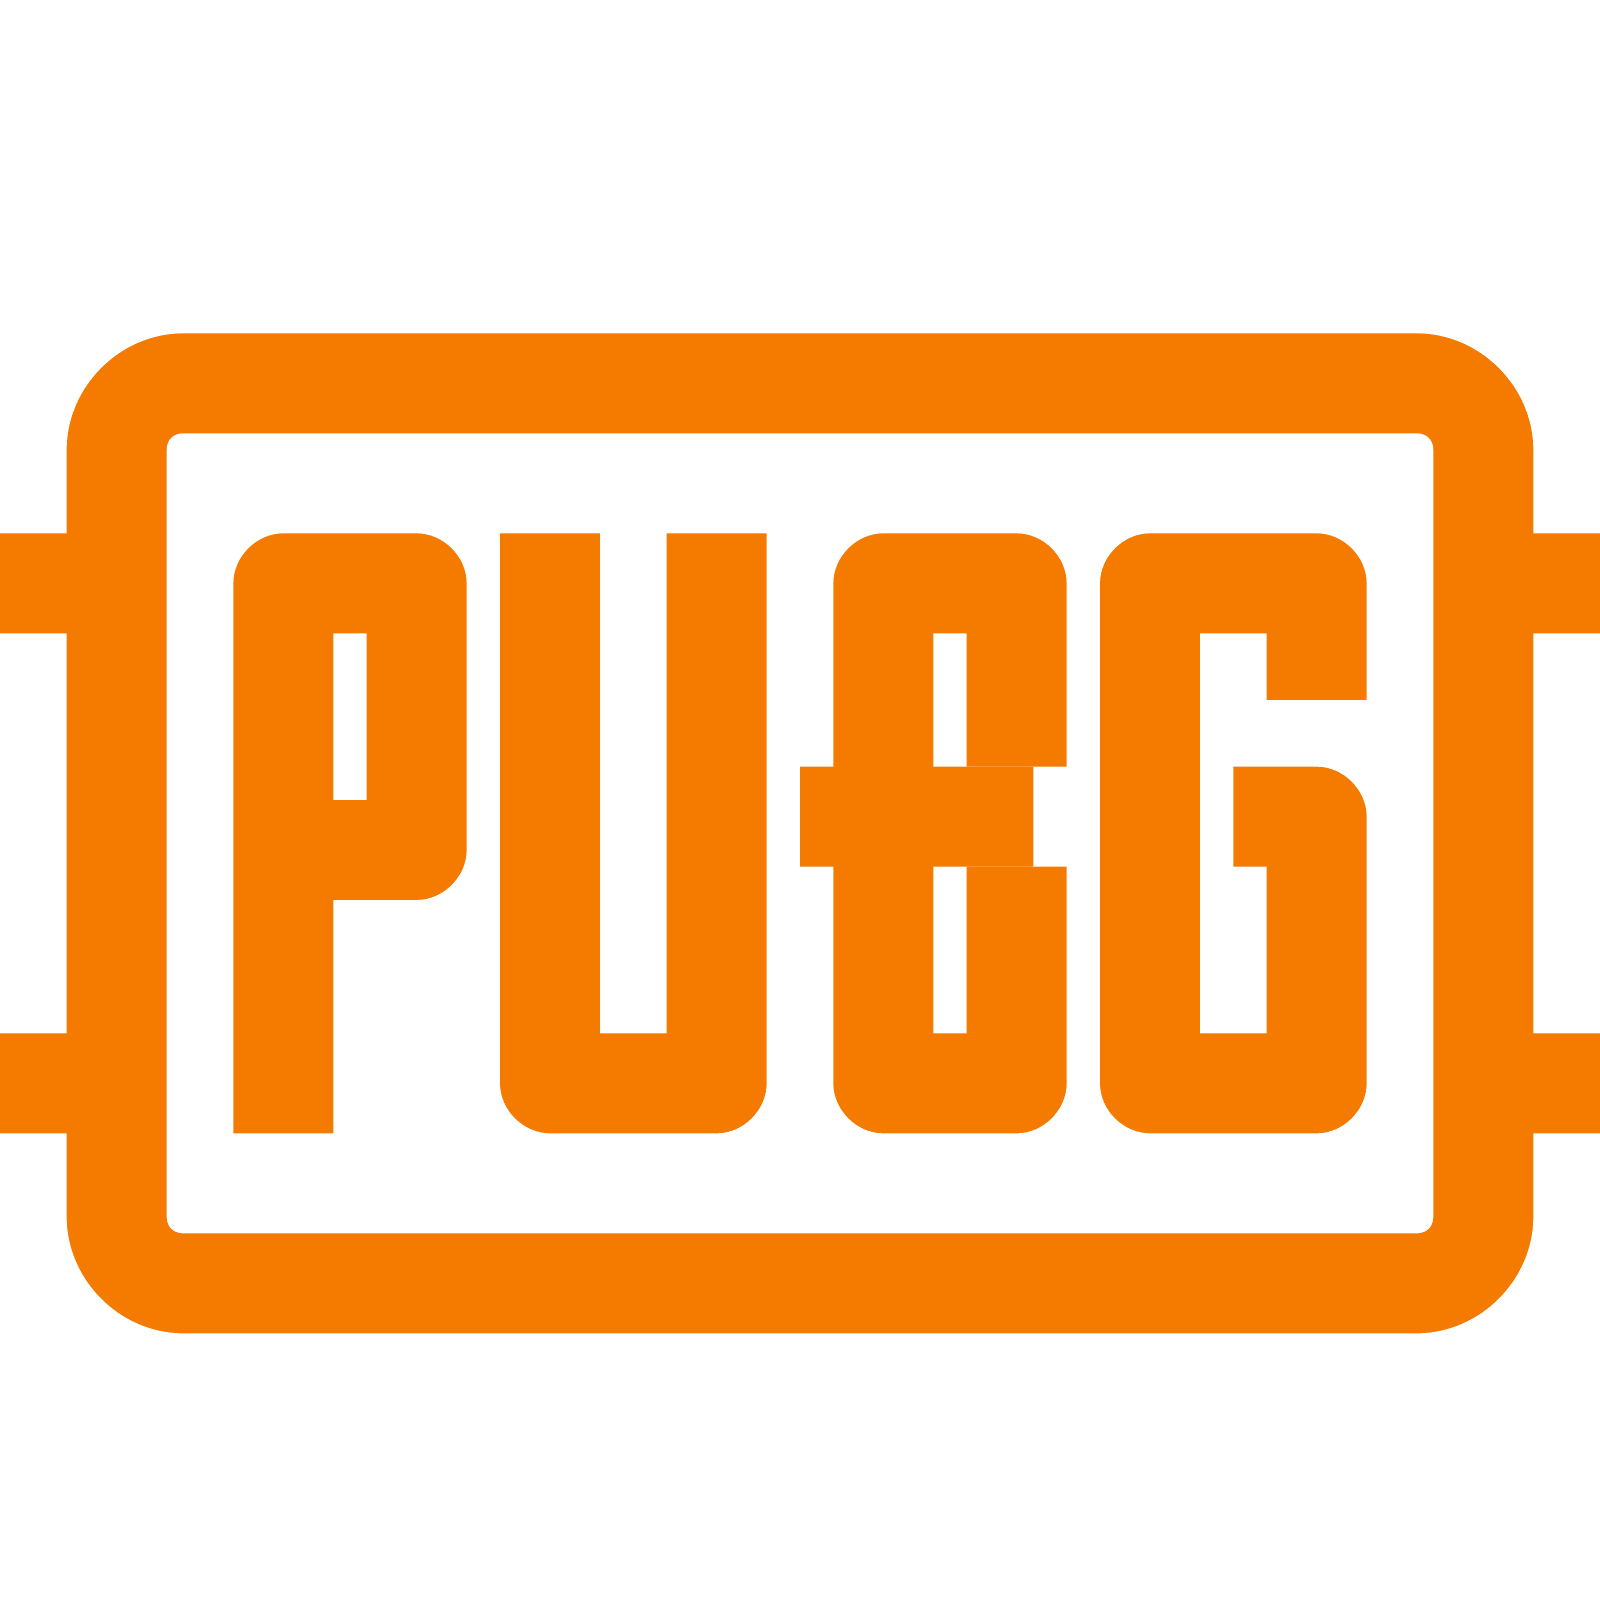 pubg Logo - PlayerUnknown's Battlegrounds PNG images free download